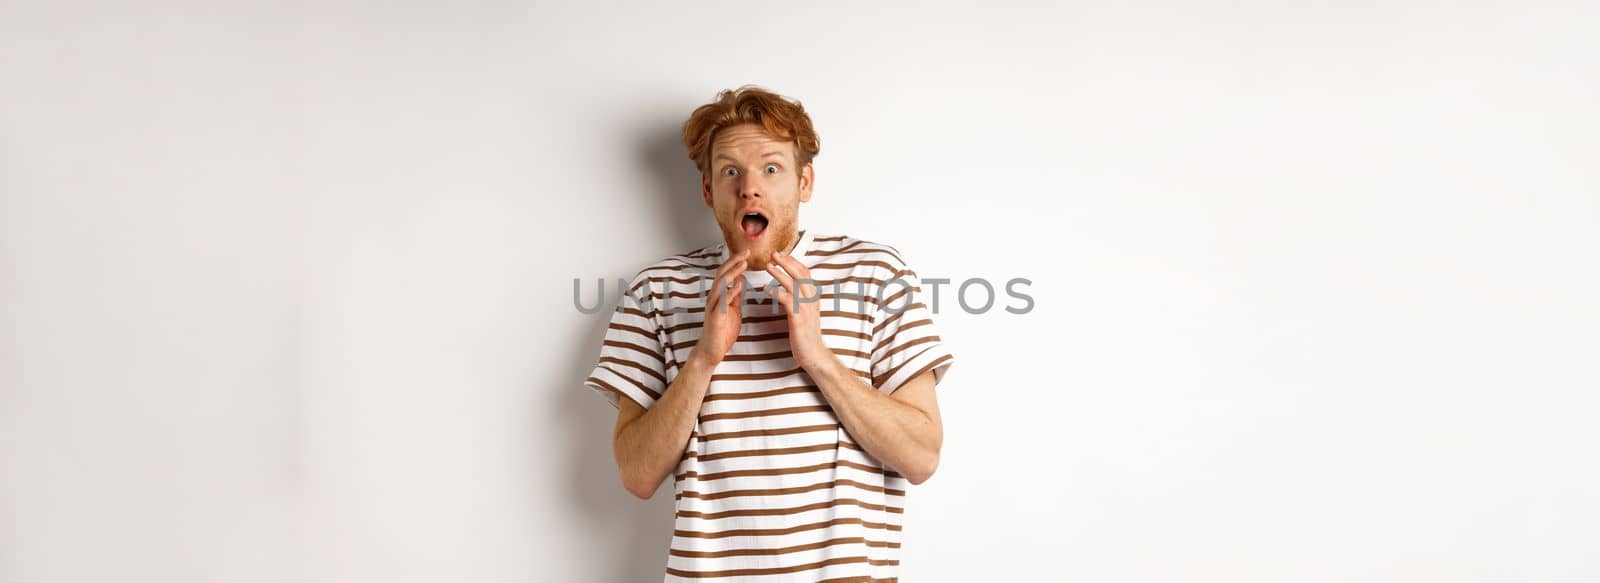 Timid young man with red hair, looking scared, jumping and screaming from fear, standing over white background.